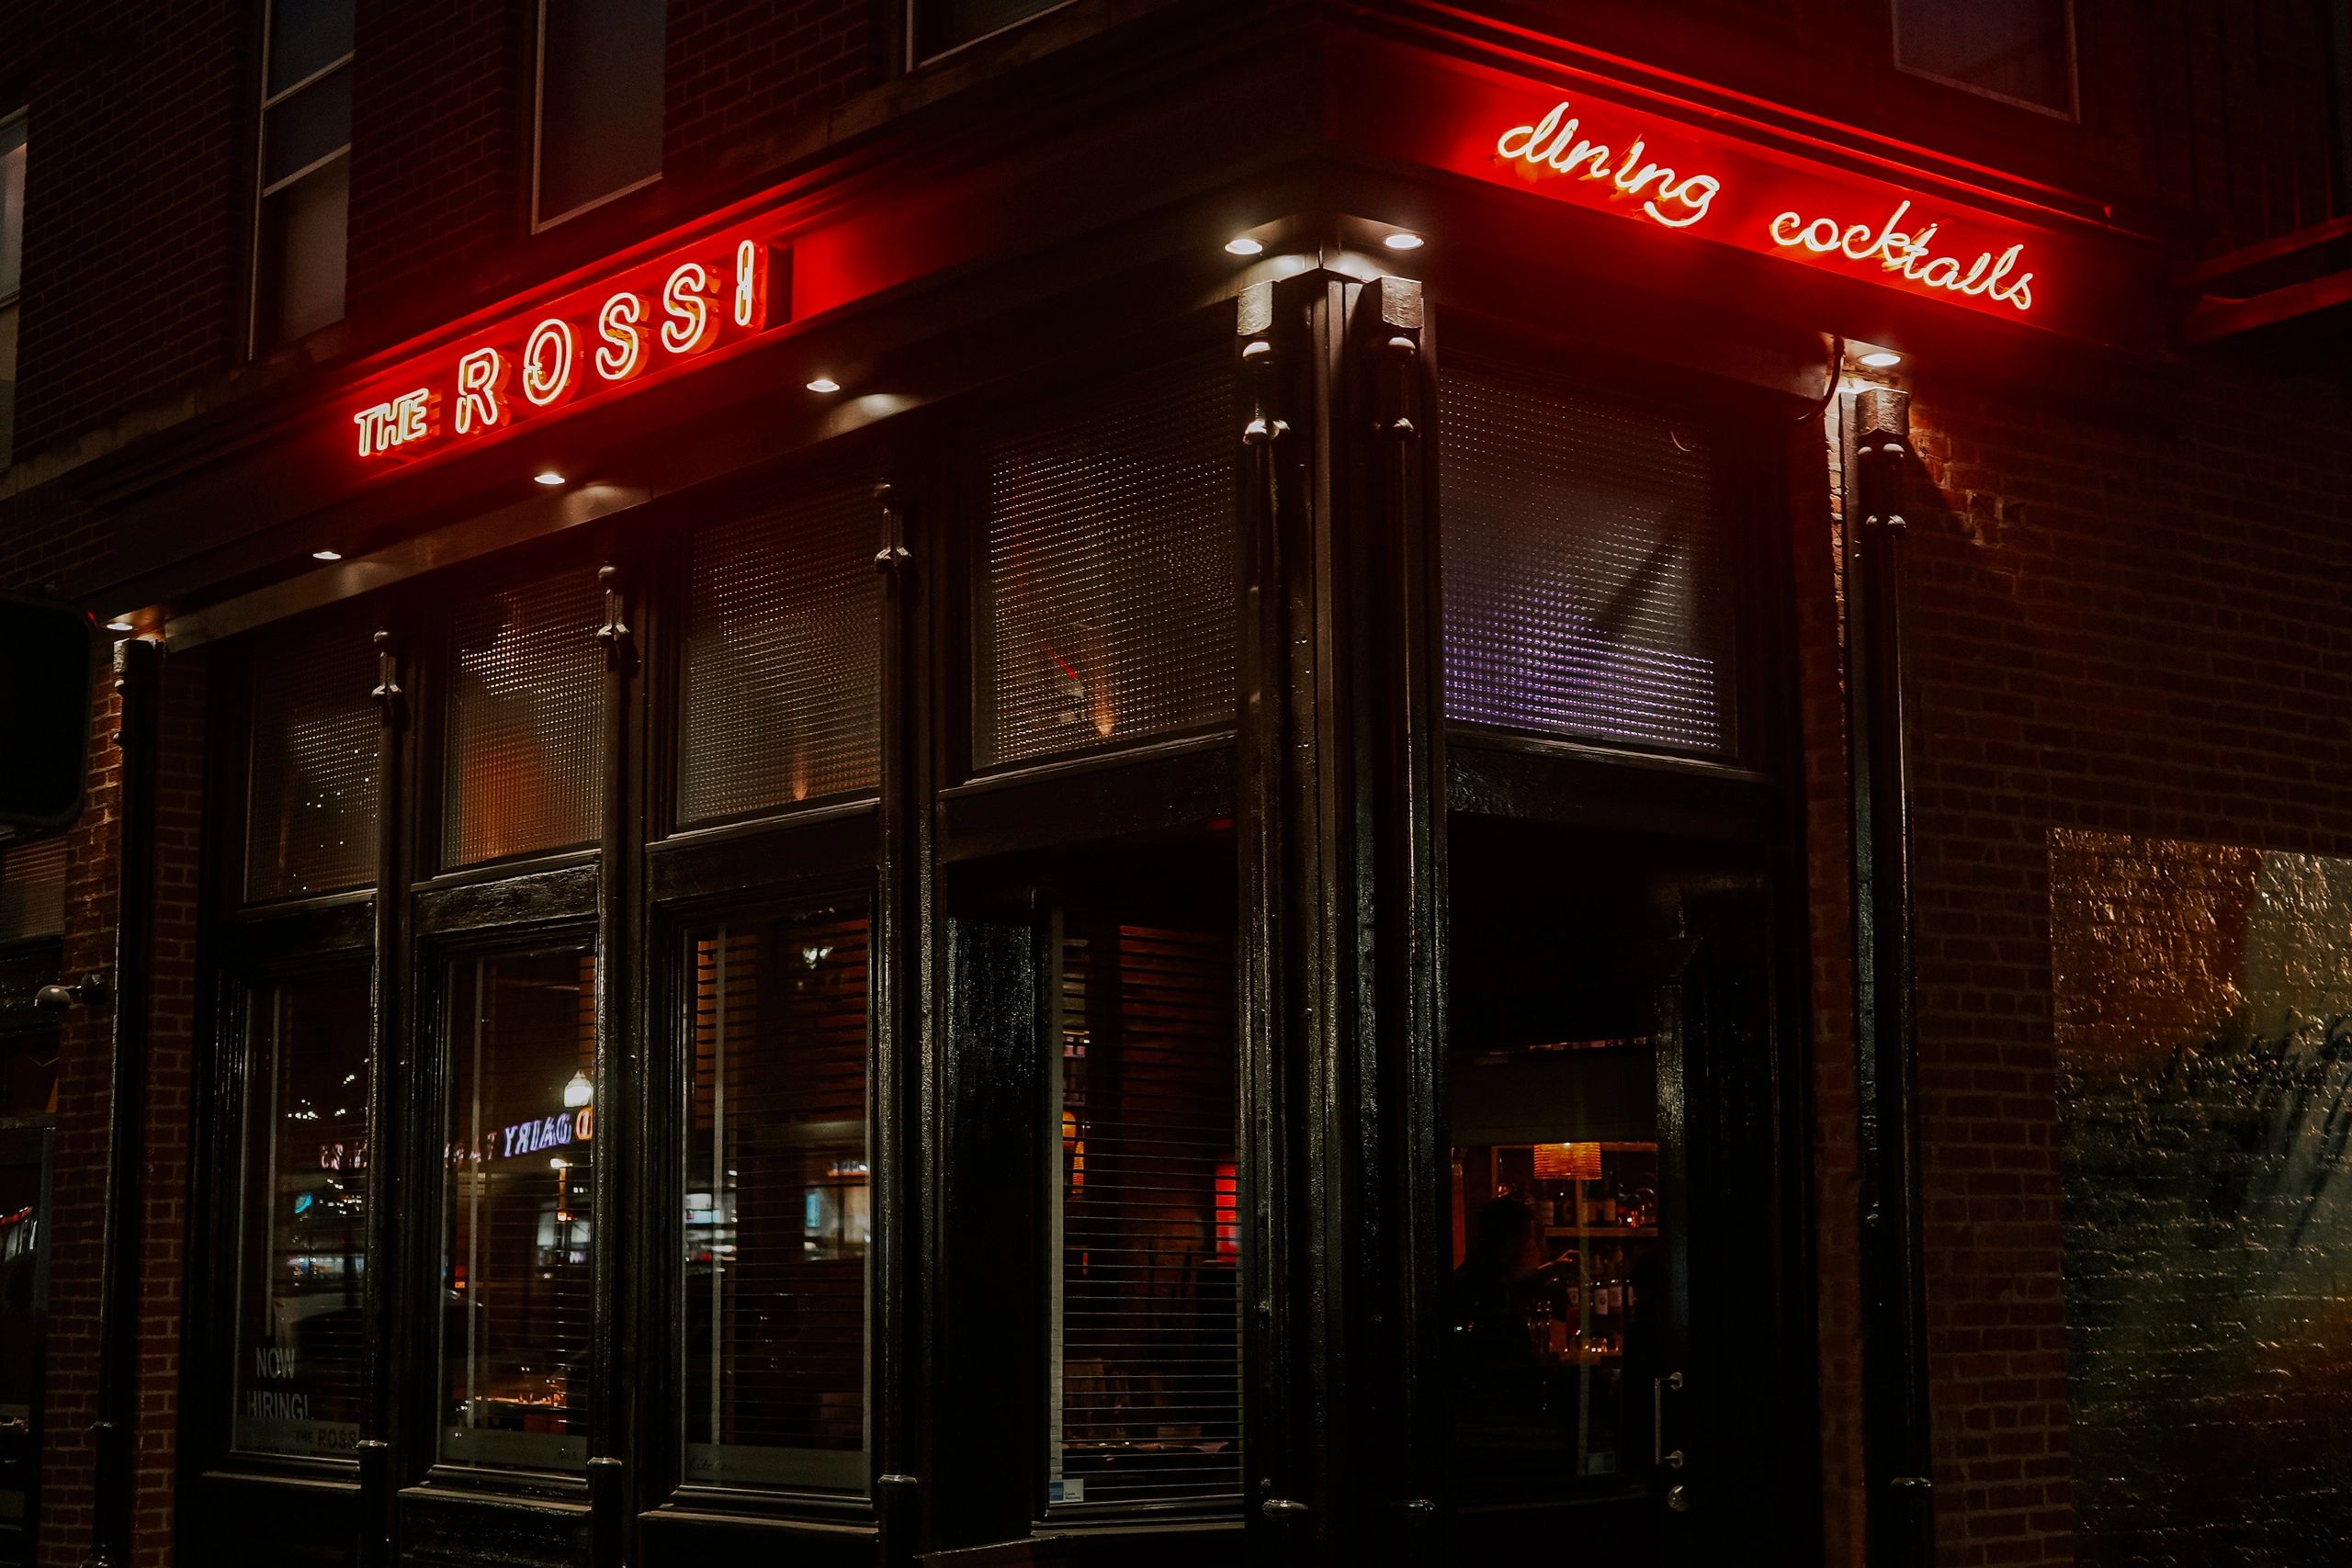 the rossi bar and kitchen menu